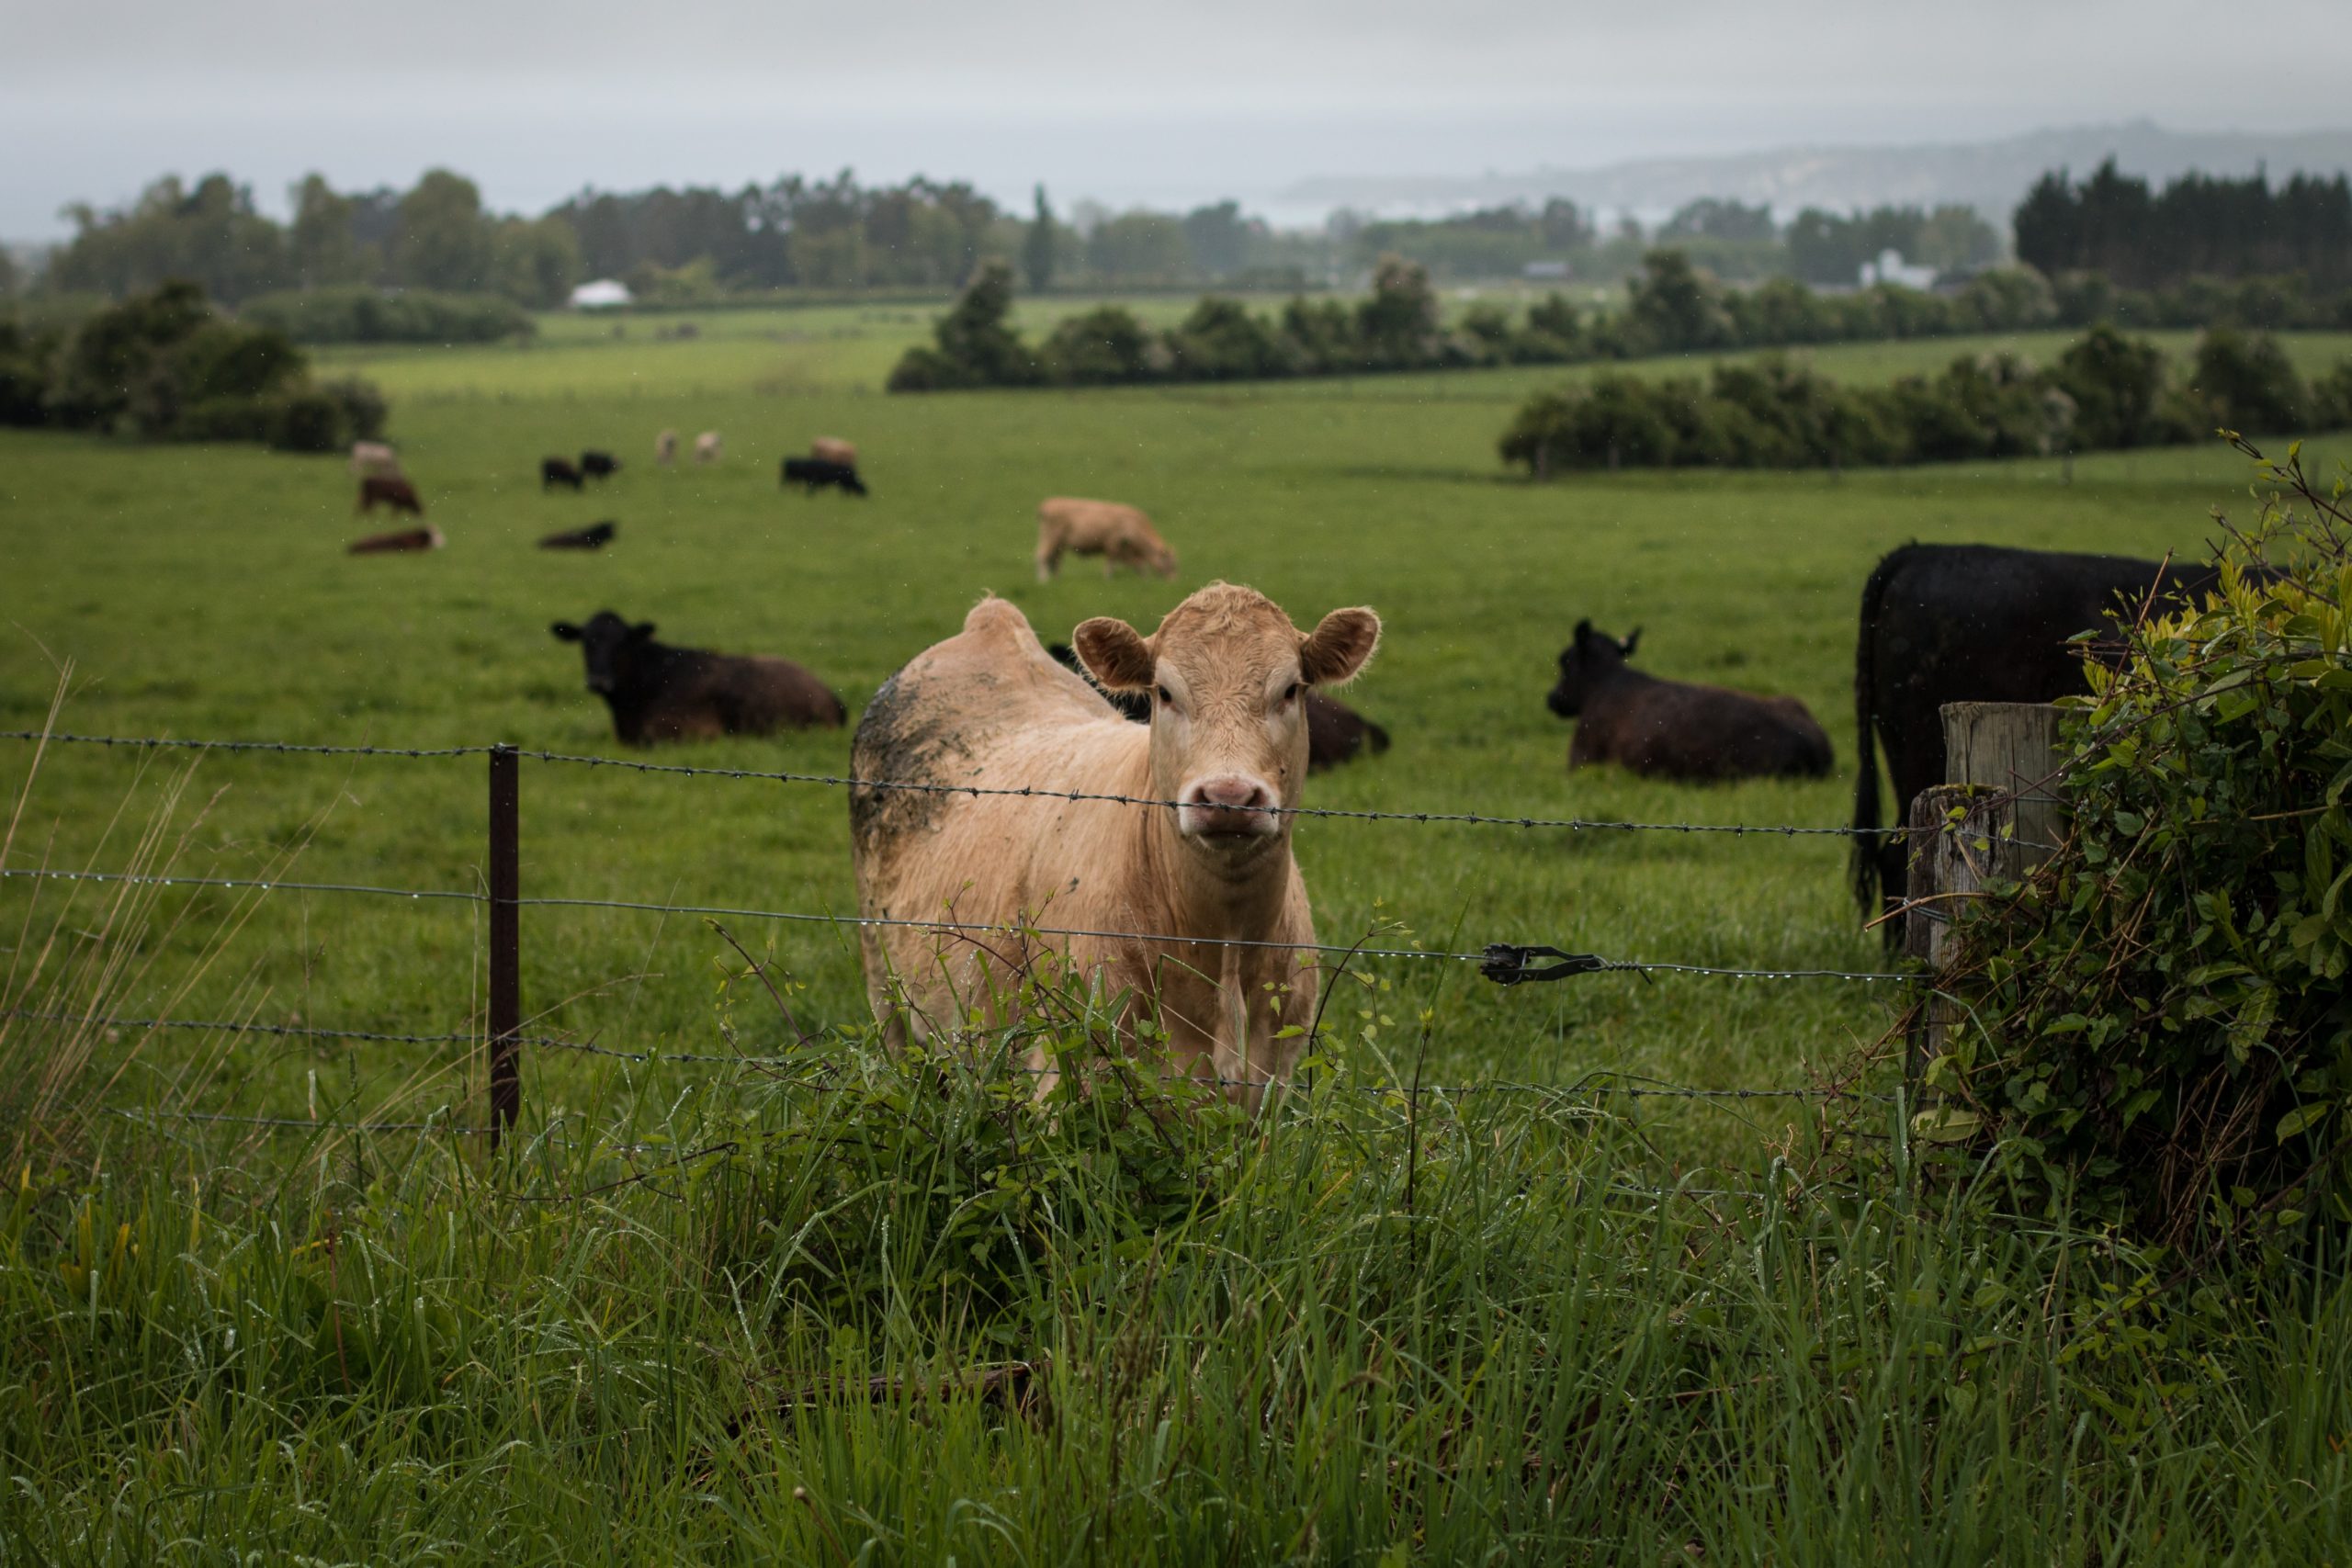 tan cow with other brown cattle in fenced area in field